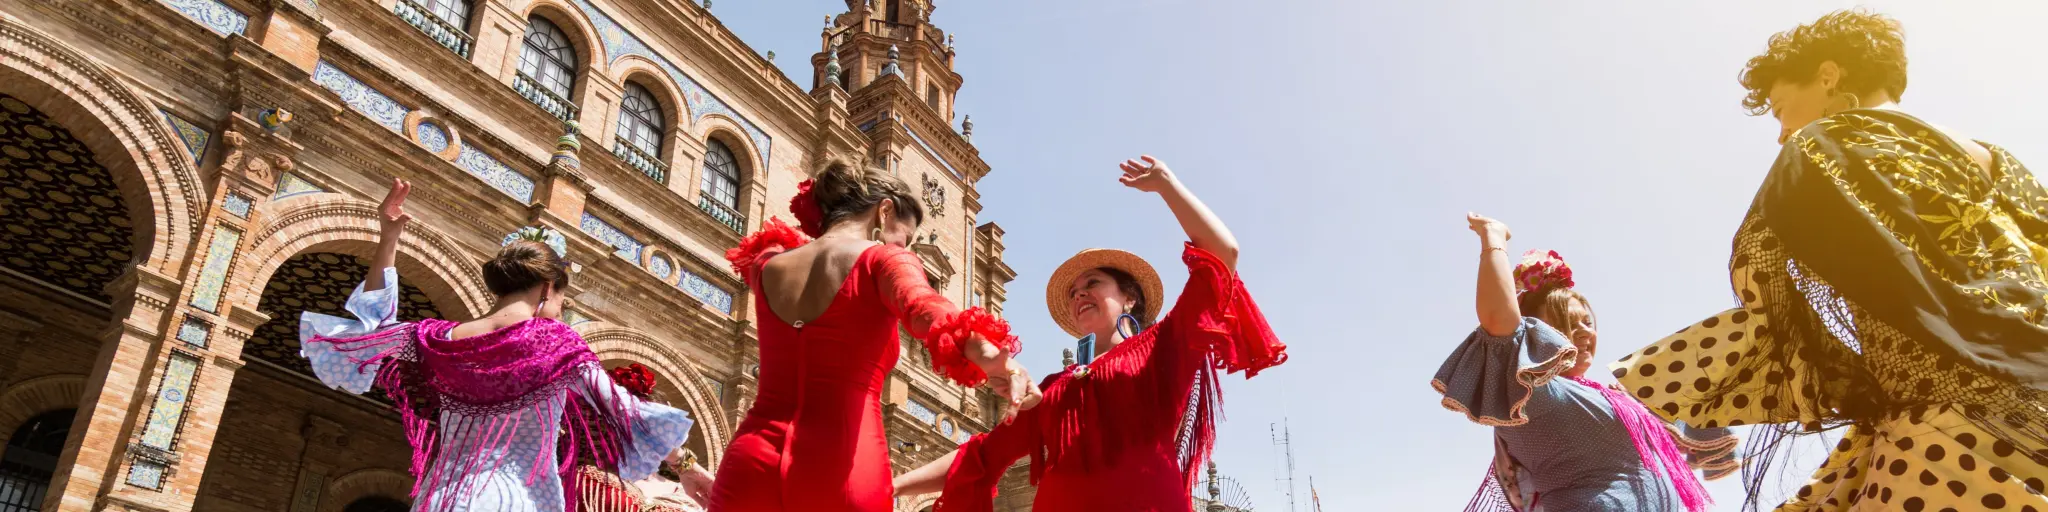 Flamenco dancers in Plaza España, Spain, two wearing red, the others in blue and pink dresses